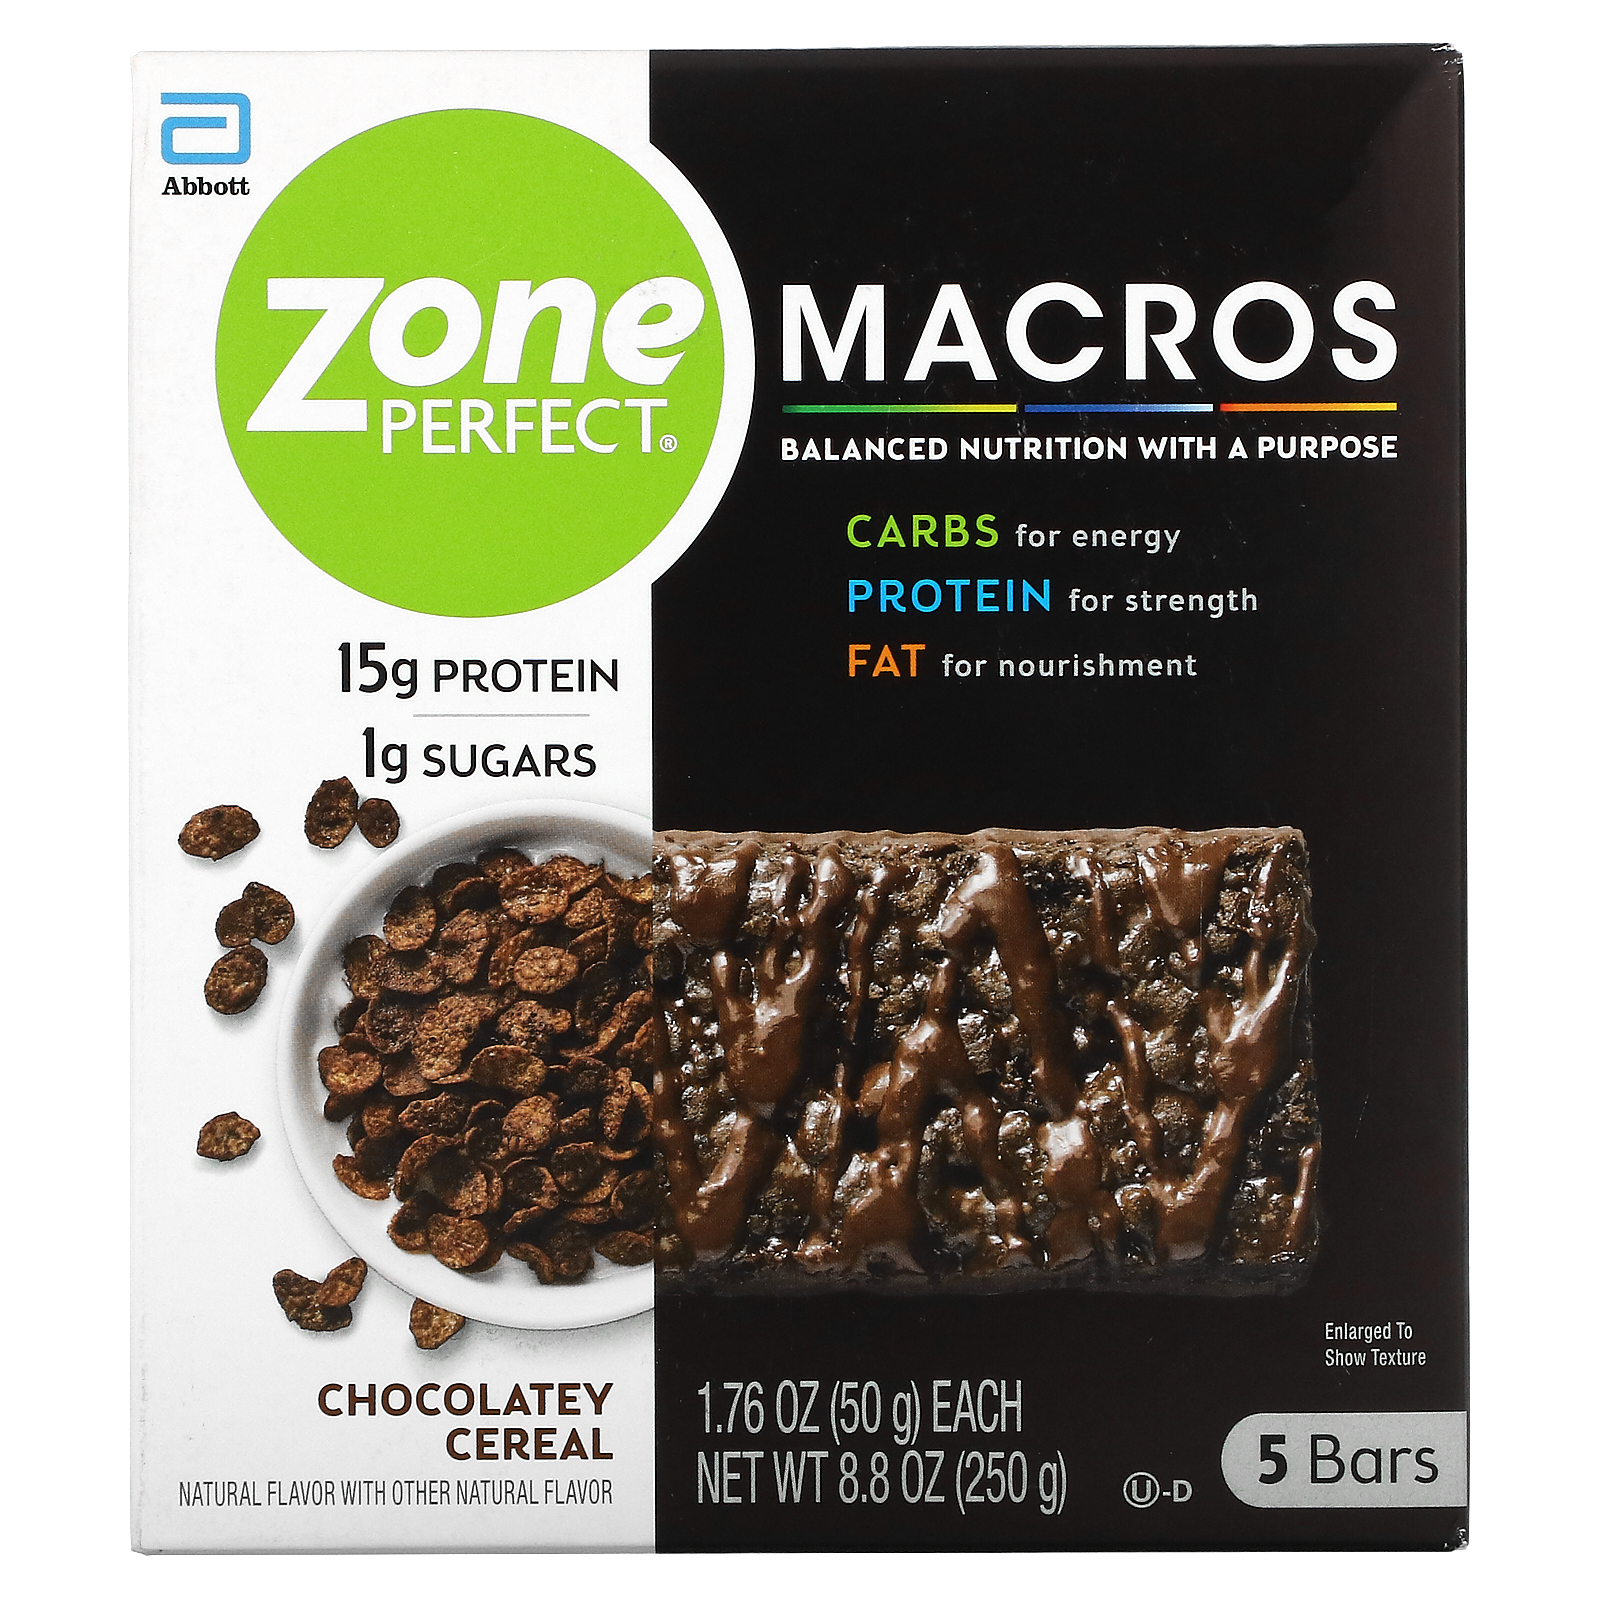 ZonePerfect MACROS マクロス バー 1.76オンス 各50g チョコレートシリアル 正規品 5本 最大42%OFFクーポン